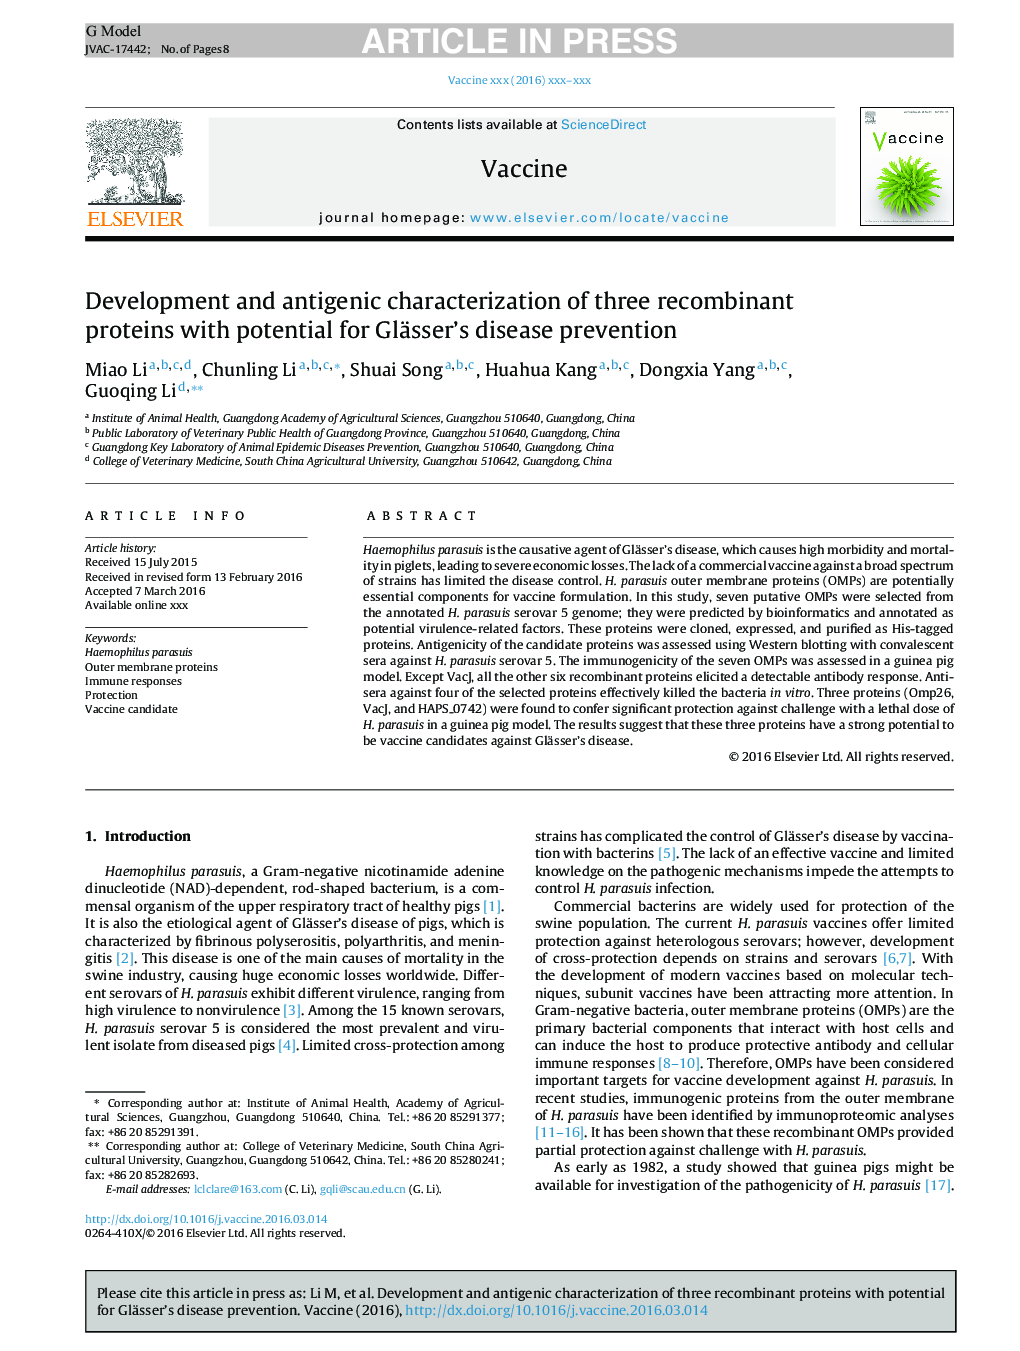 Development and antigenic characterization of three recombinant proteins with potential for Glässer's disease prevention